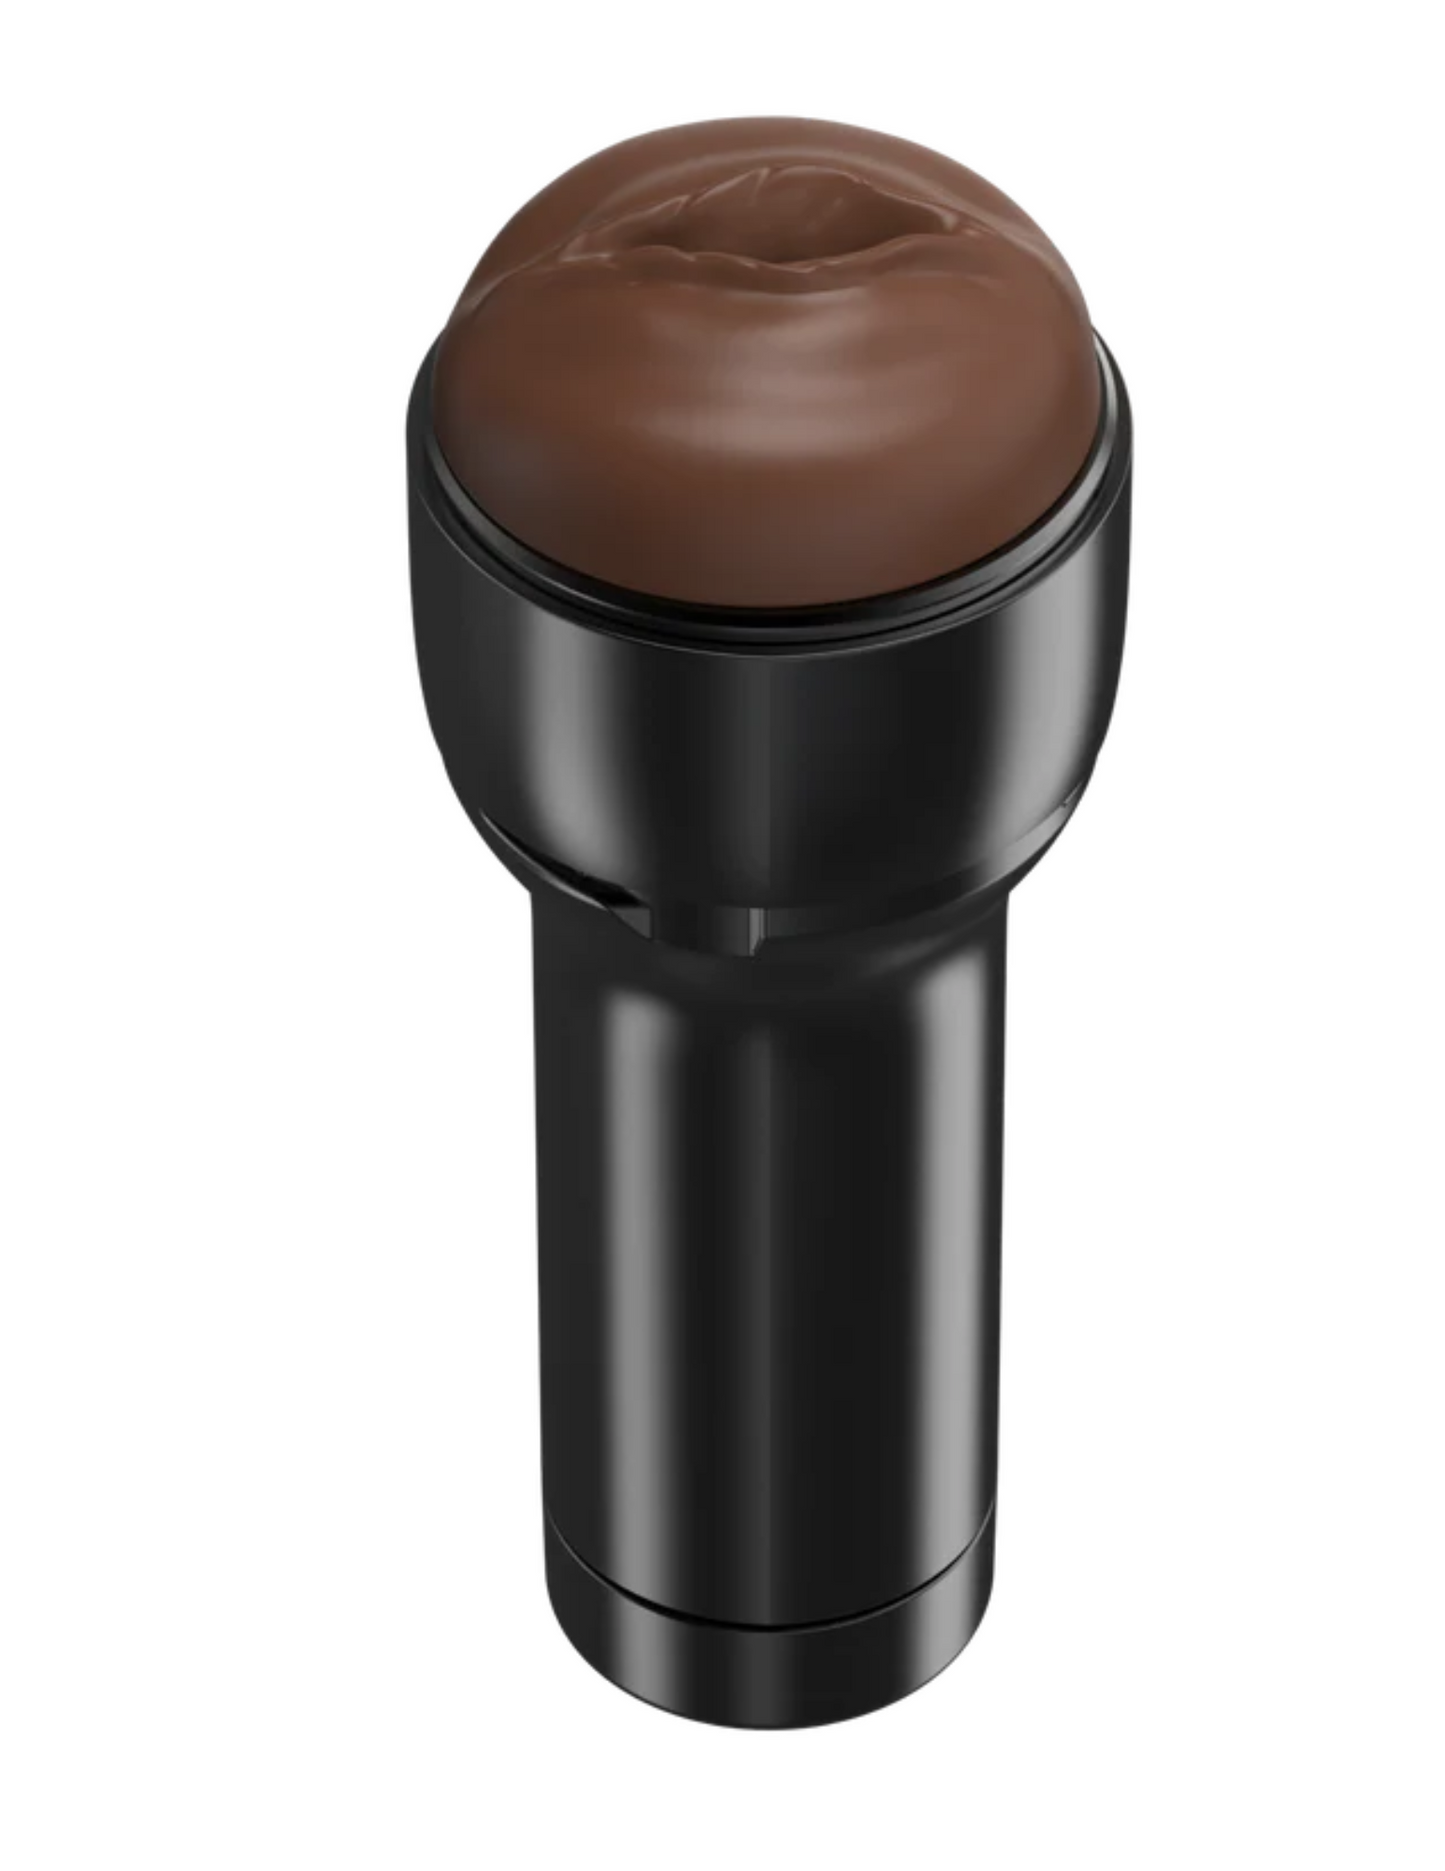 Photo of the KiiRoo Feel Stroker (dark brown) inside of its protective case.